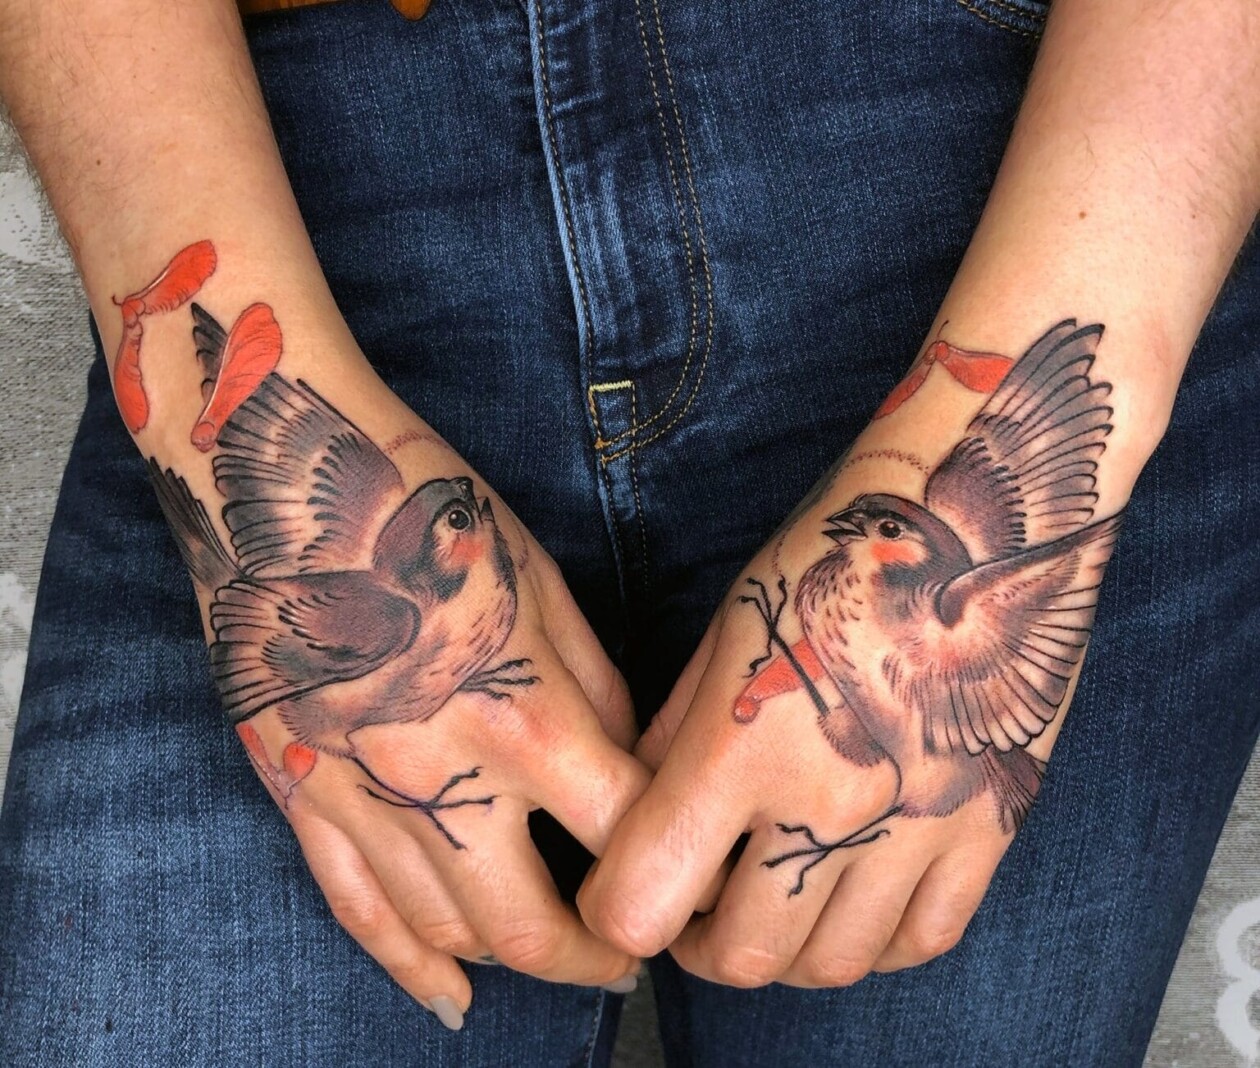 Stephanie Brown Creates Whimsical Tattoos Of Birds Holding A Lit Match Symbolizing Hope For A Better Future (6)